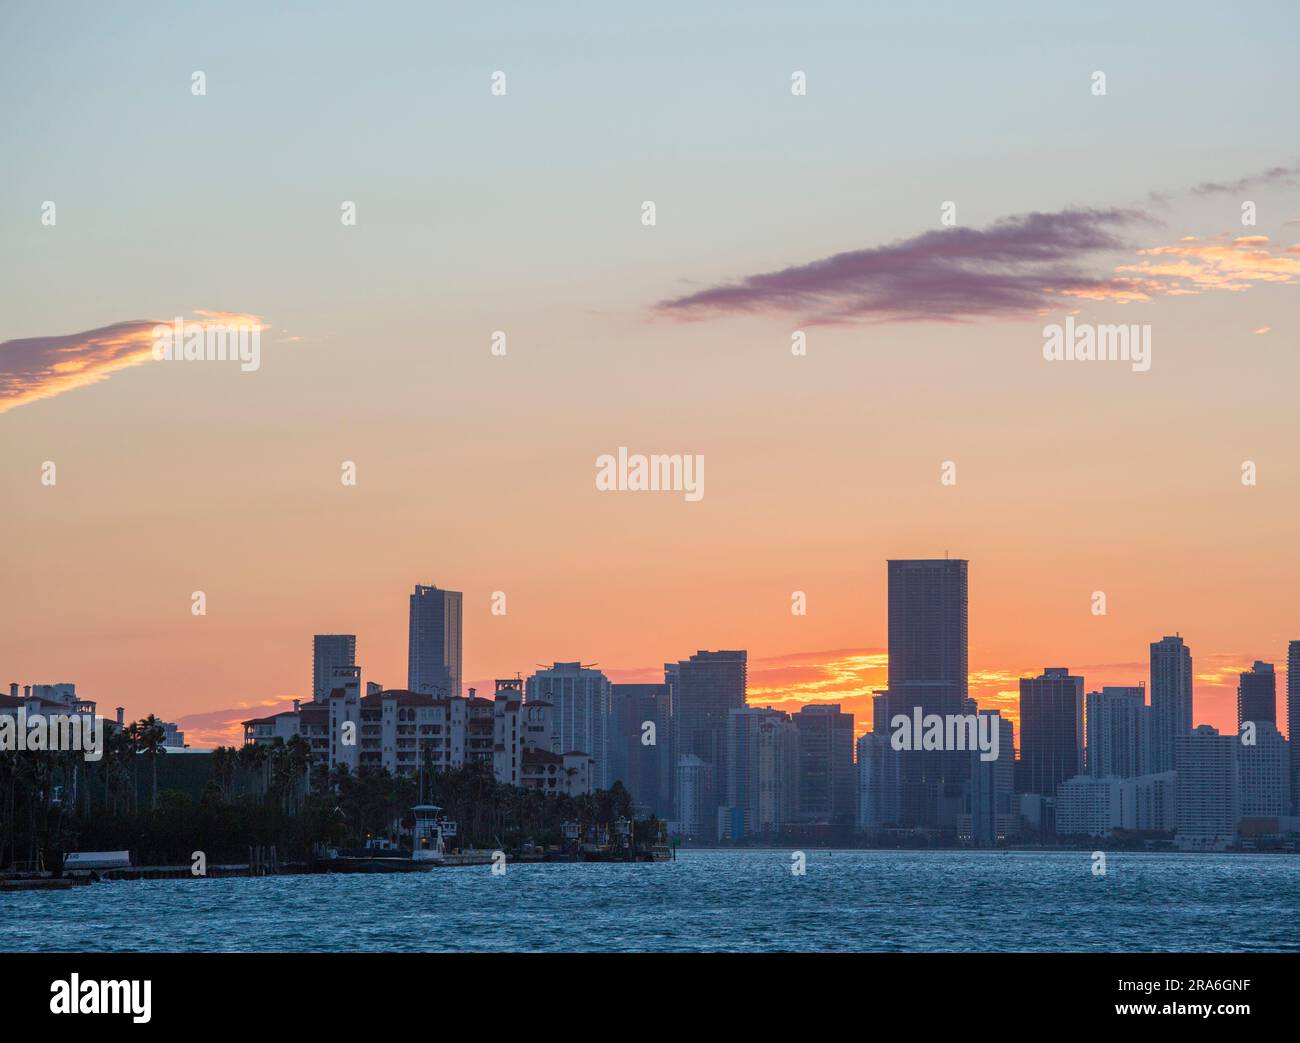 Miami Beach, Florida, USA. View from South Pointe Park, South Beach, across Biscayne Bay to the skyscrapers of Downtown Miami, sunset. Stock Photo